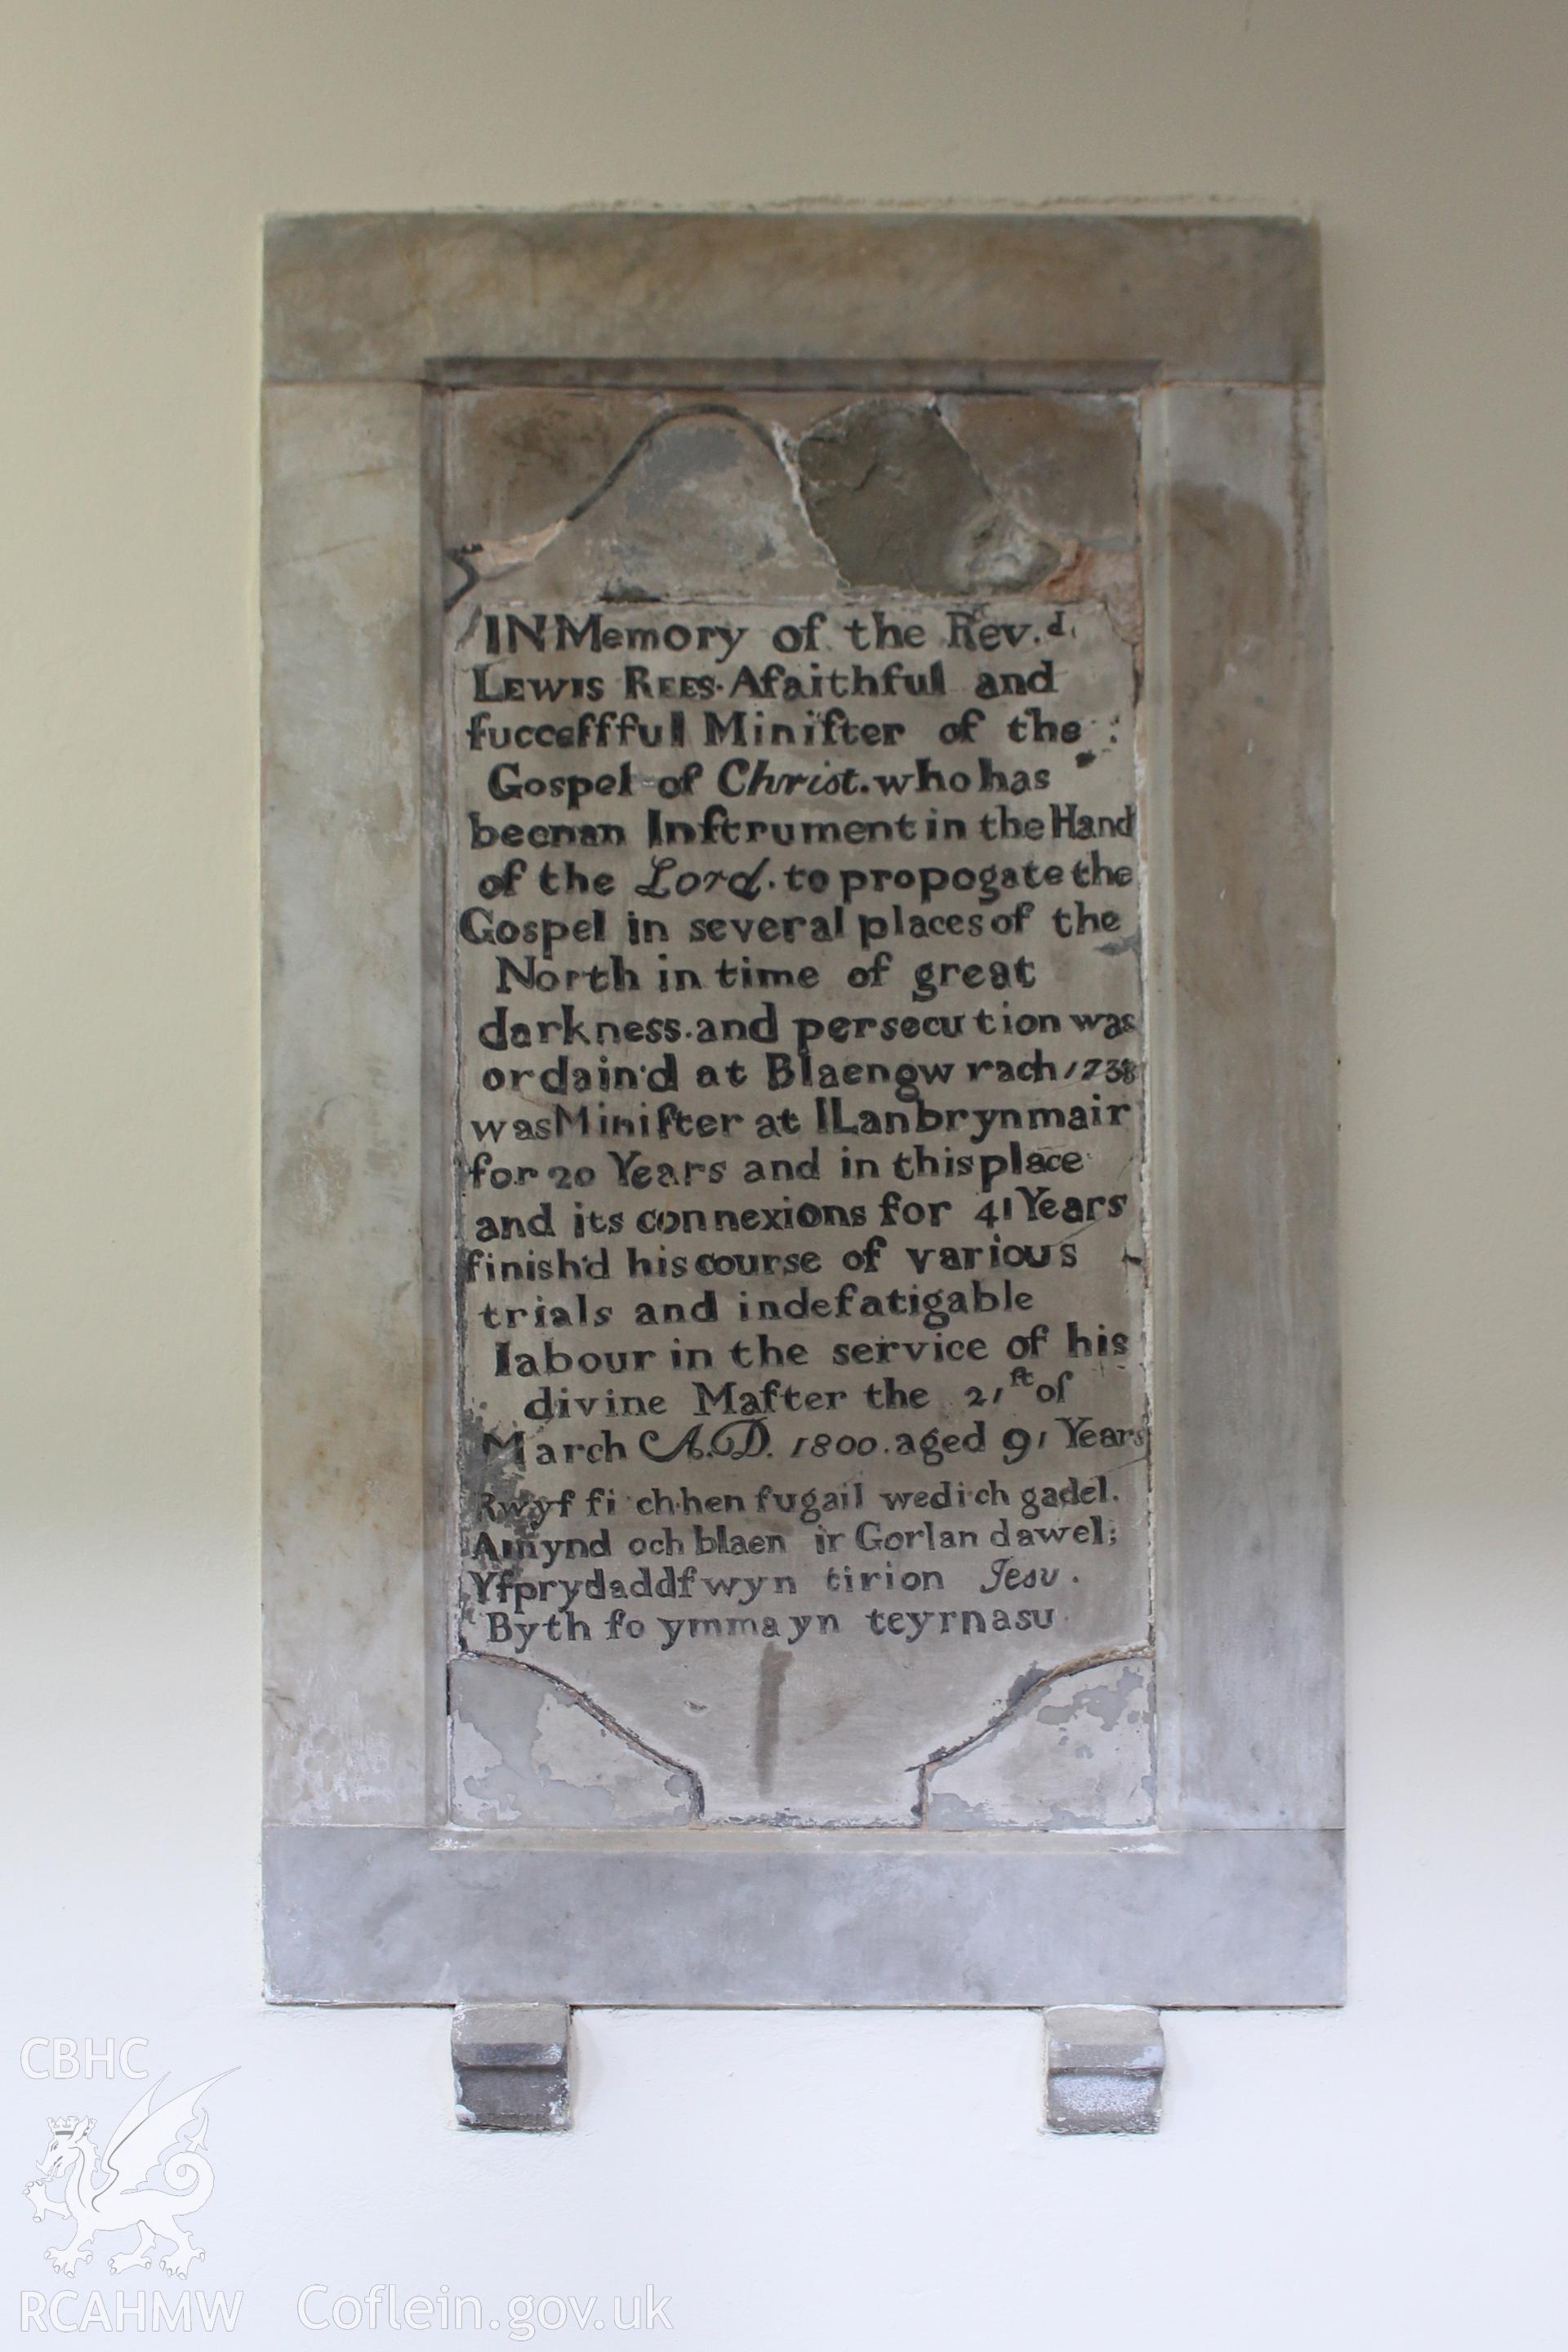 Colour photograph showing detail of memorial stone at Mynydd Bach Independent Chapel dedicated to the Rev. Lewis Rees, who died on 21st March 1800. Taken during photographic survey conducted by Sue Fielding on 13th May 2017.